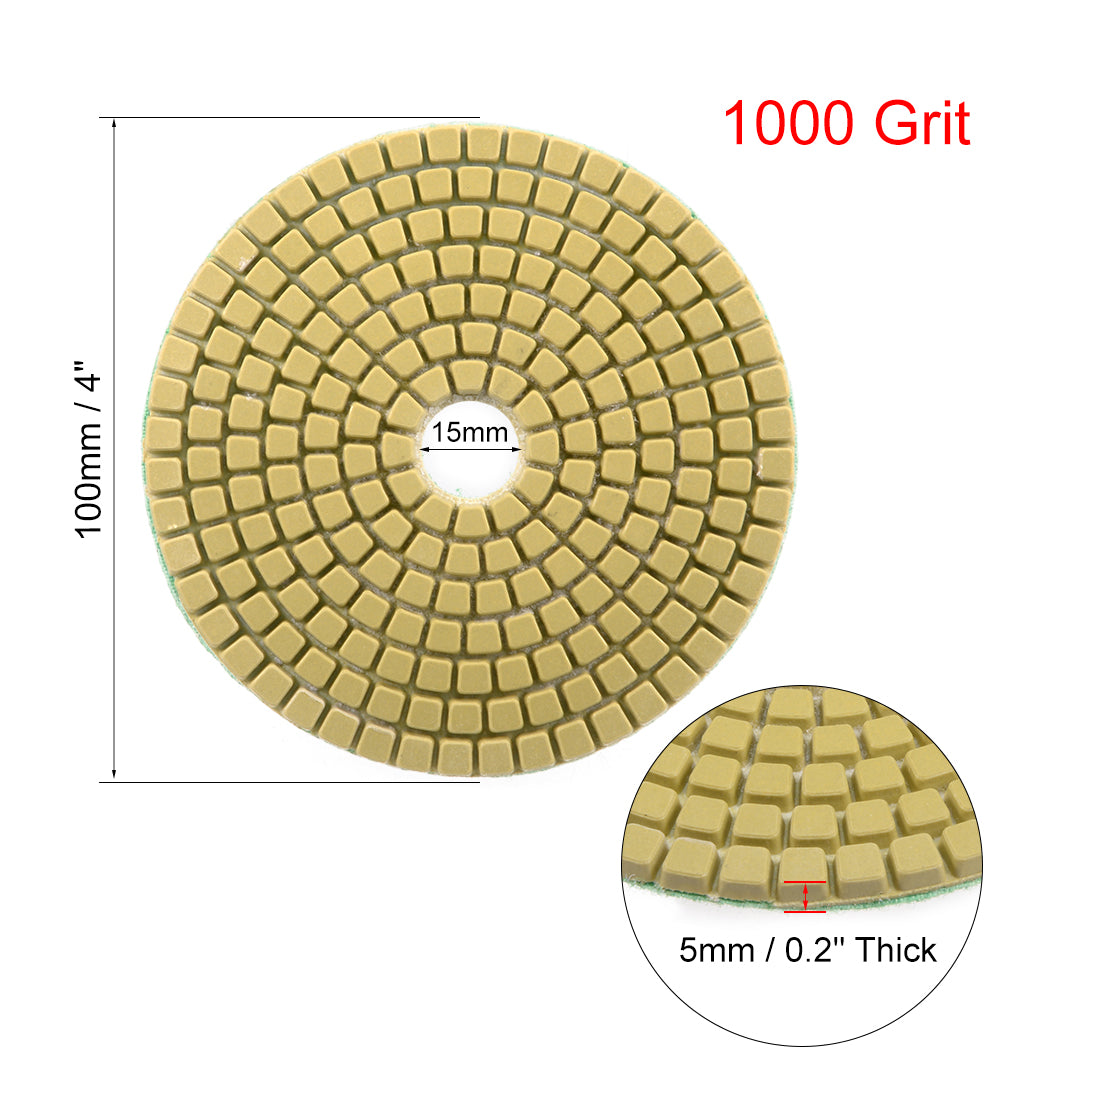 uxcell Uxcell Diamond Polishing Sanding Grinding Pads Discs 4 Inch Grit 1000 10 Pcs for Granite Concrete Stone Marble